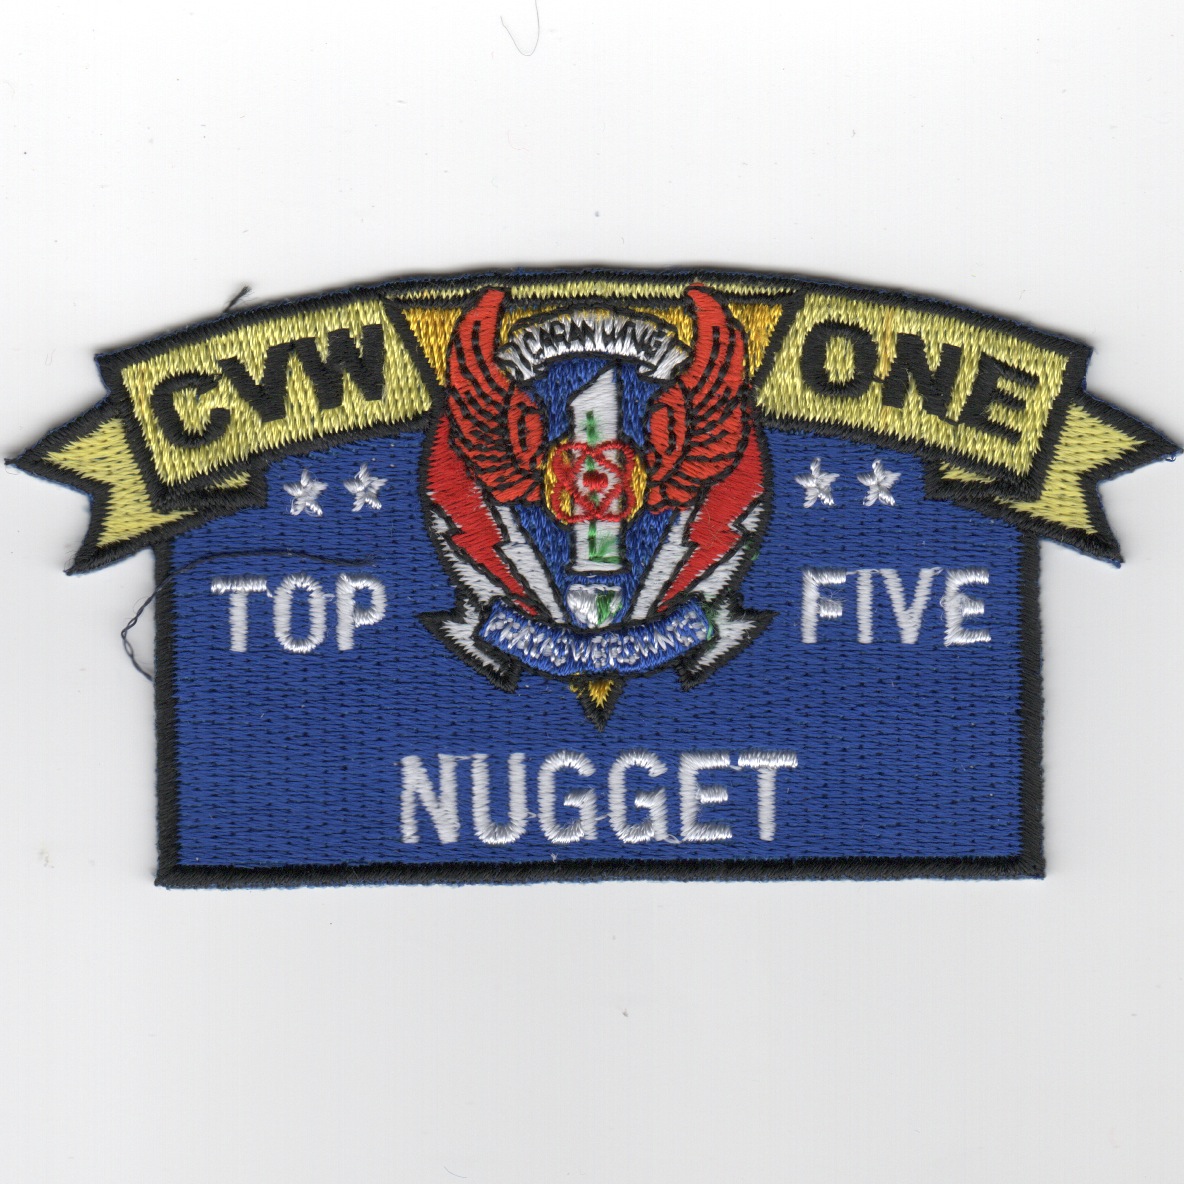 CVW-1 'TOP FIVE NUGGET' Award Patch